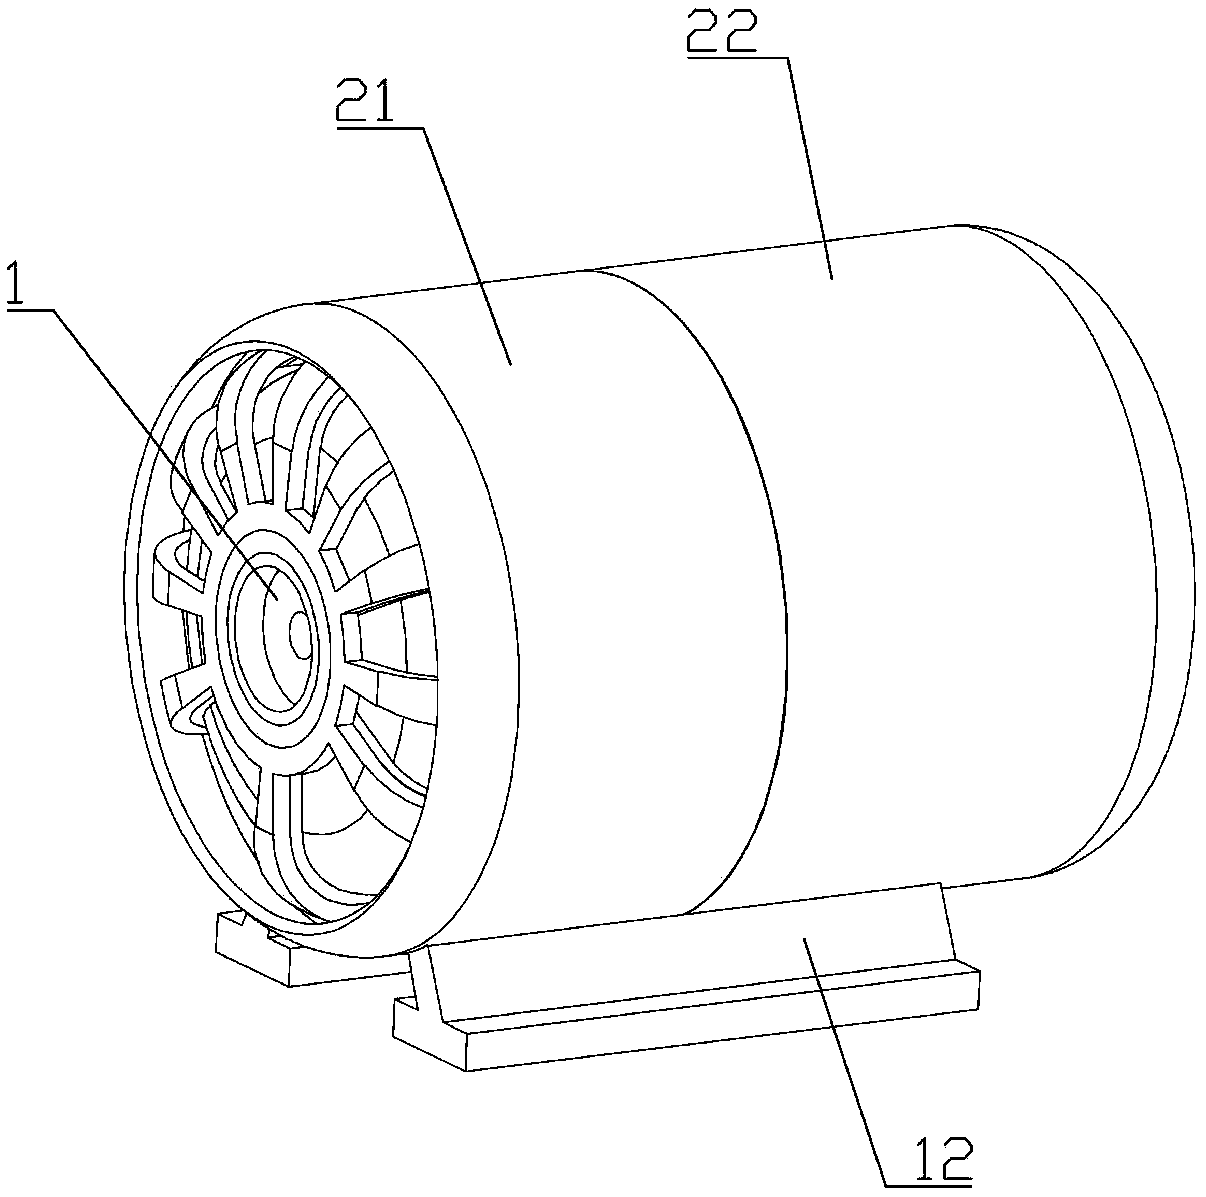 A contact heat dissipation motor